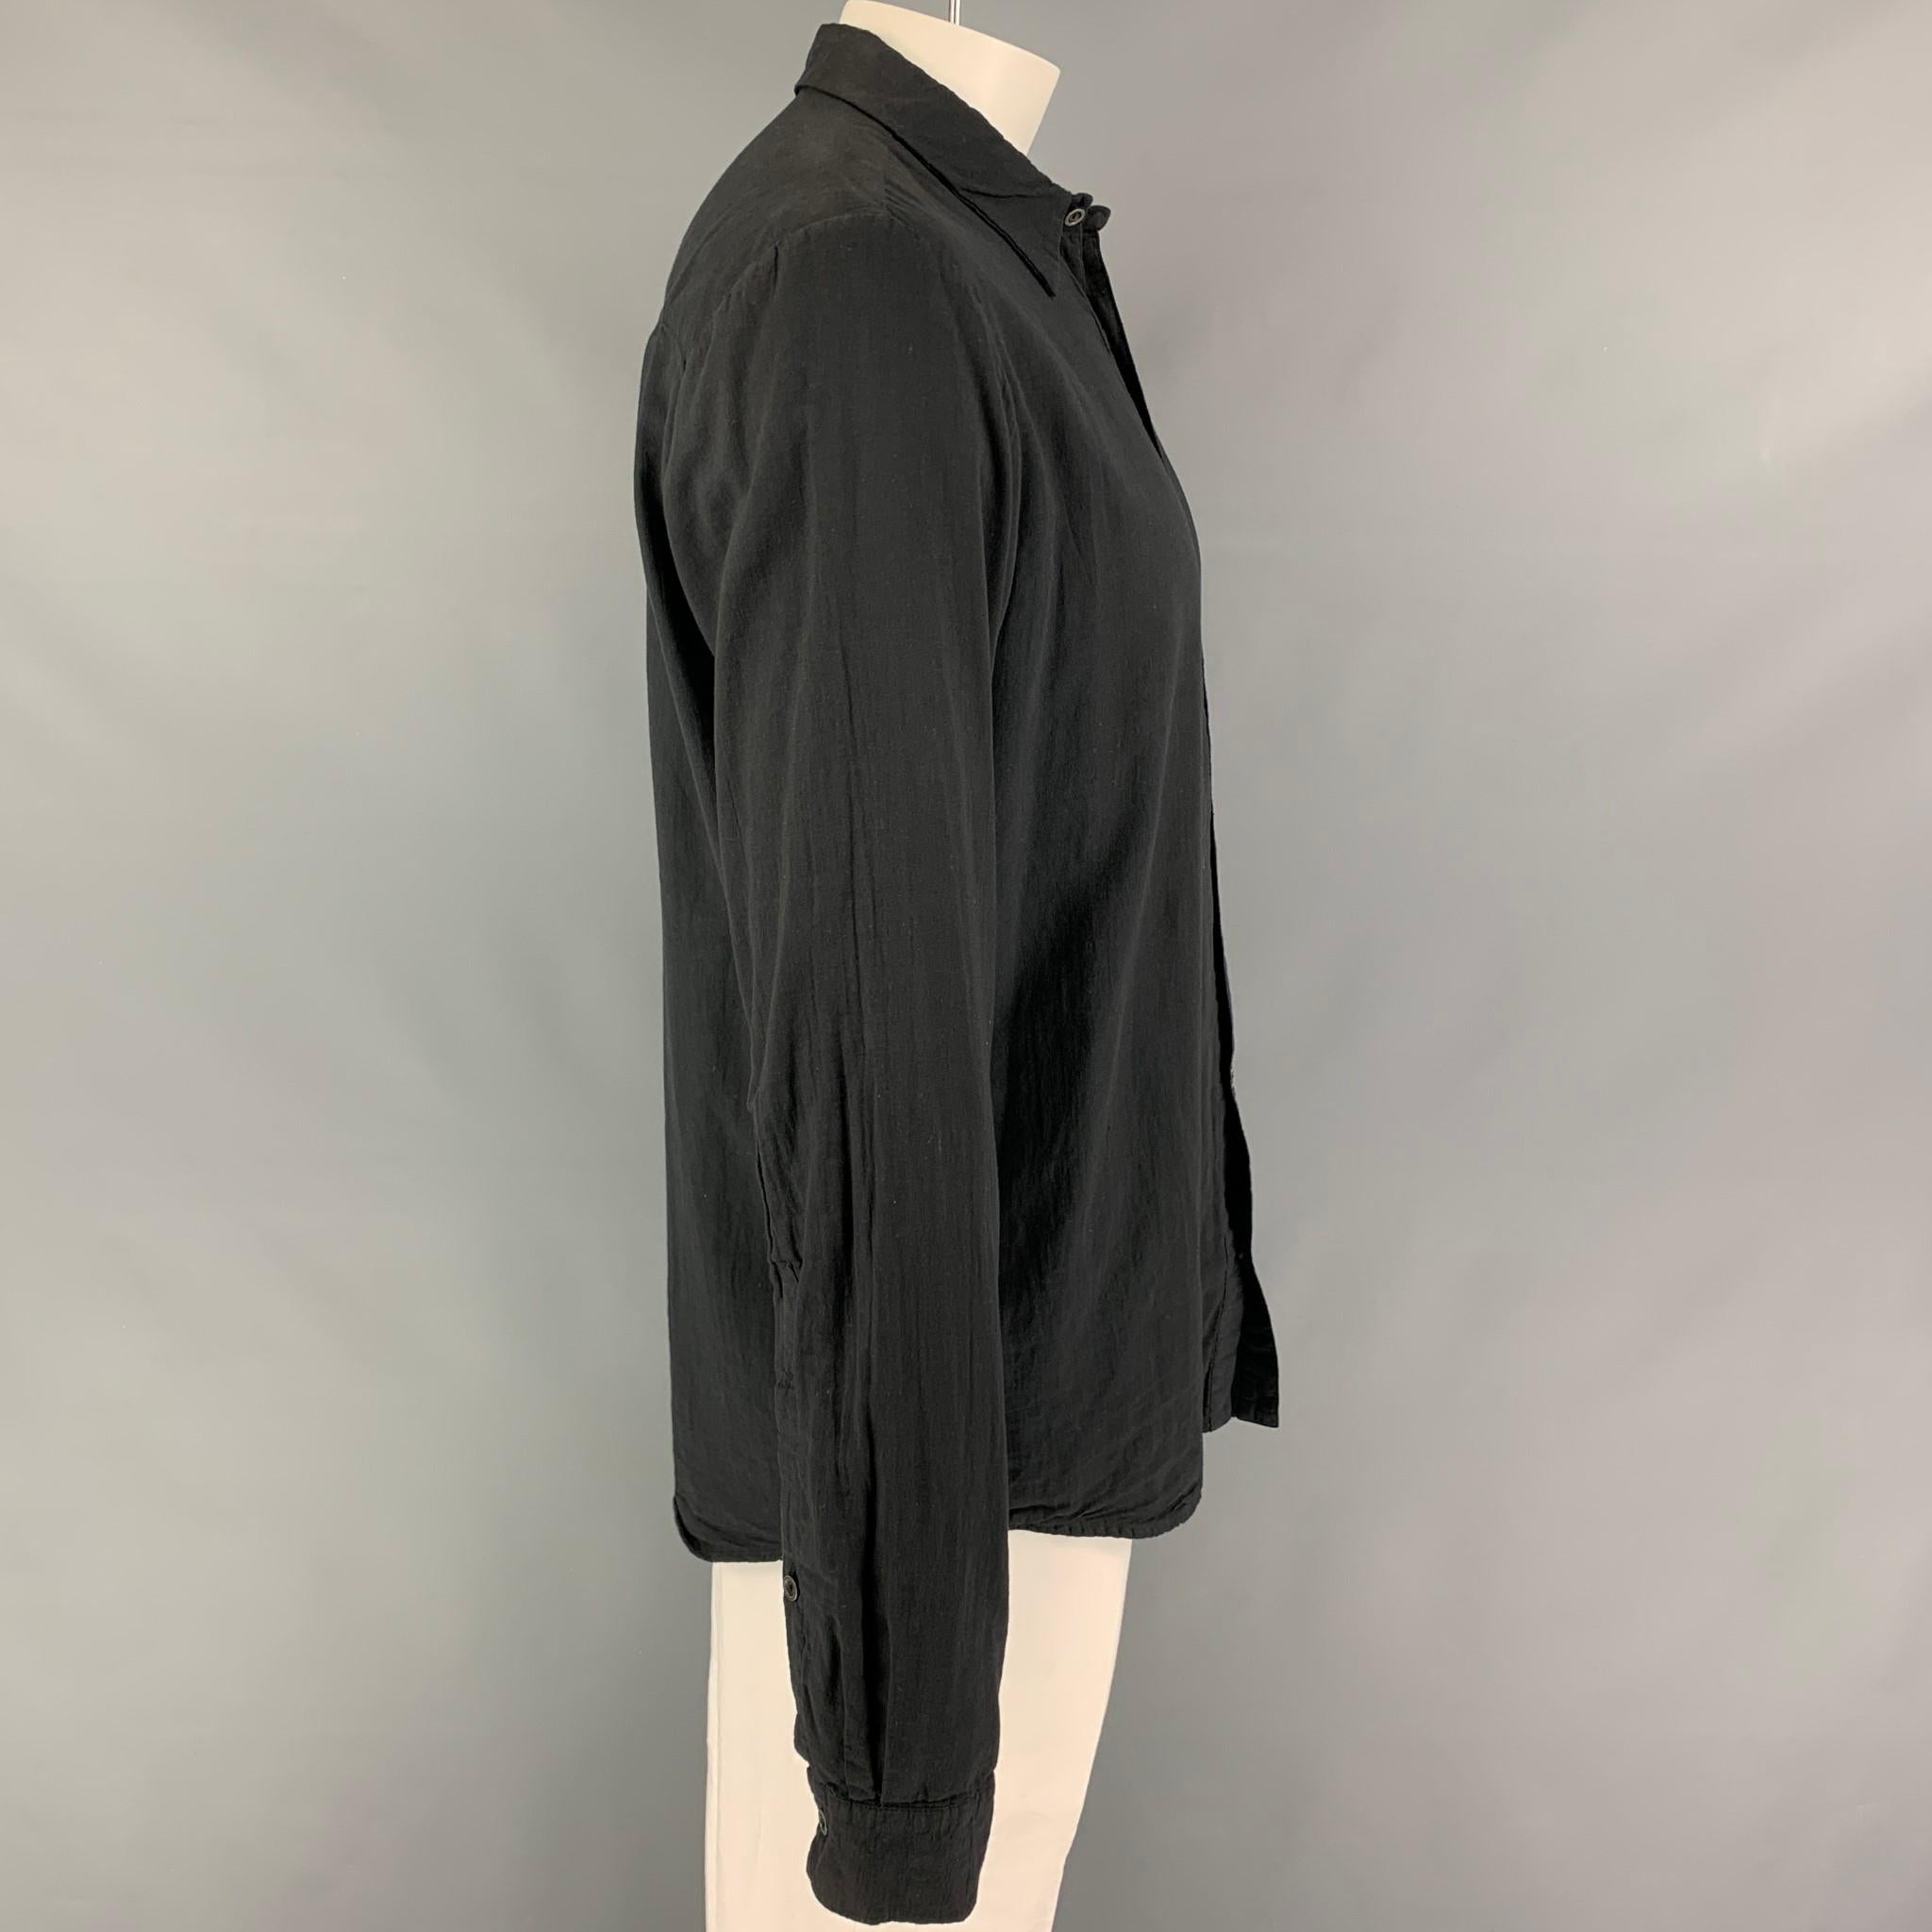 FORME 3’3204322896  long sleeve shirt comes in a black cotton featuring a spread collar and a button up closure. Made in Italy. 

Very Good Pre-Owned Condition.
Marked: 52

Measurements:

Shoulder: 19 in.
Chest: 42 in.
Sleeve: 30 in.
Length: 31 in.